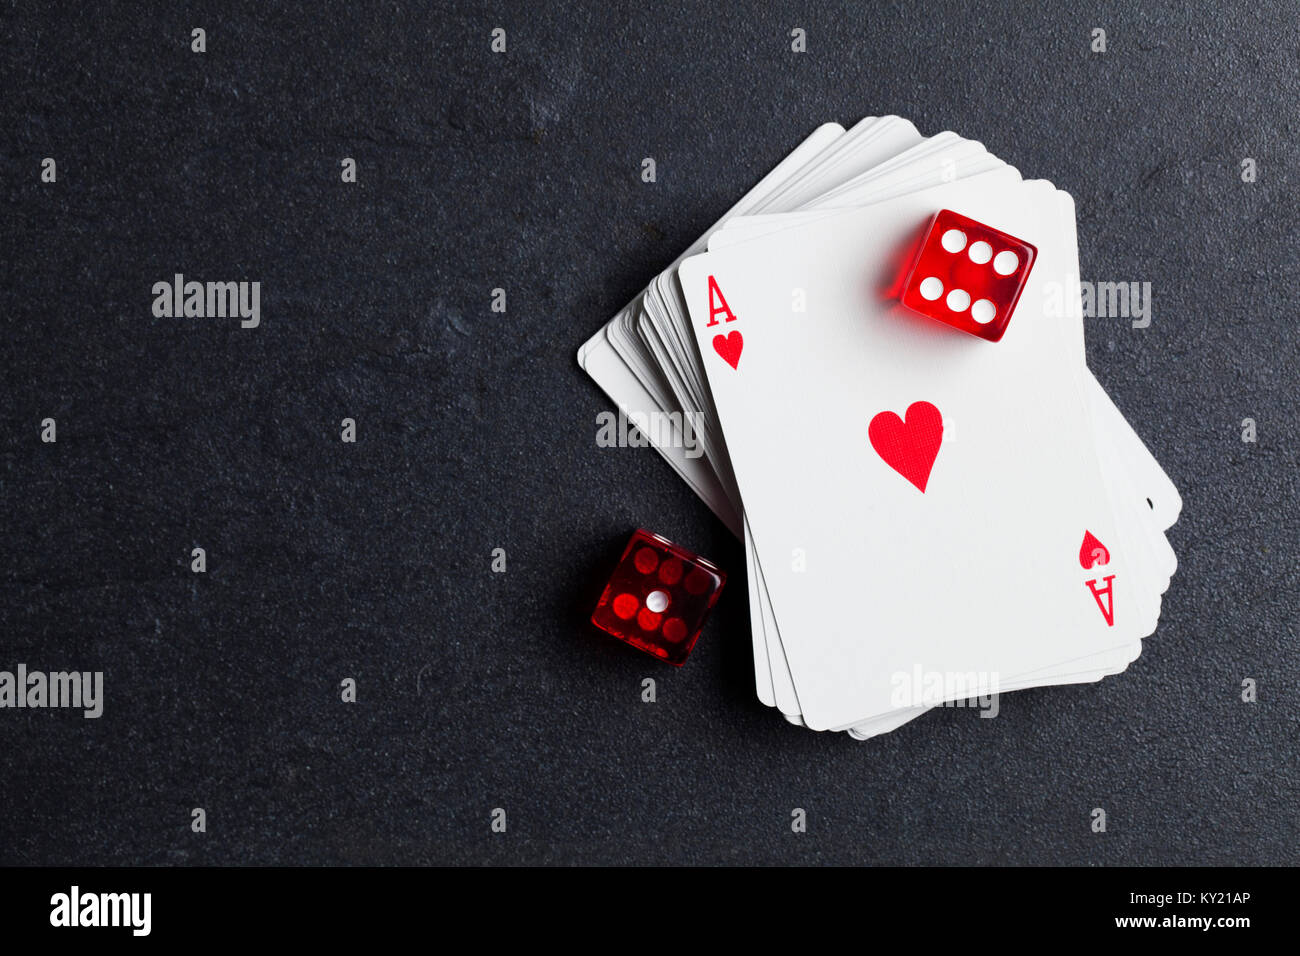 Ace playing cards with red dice. Casino betting and gambling concept Stock Photo